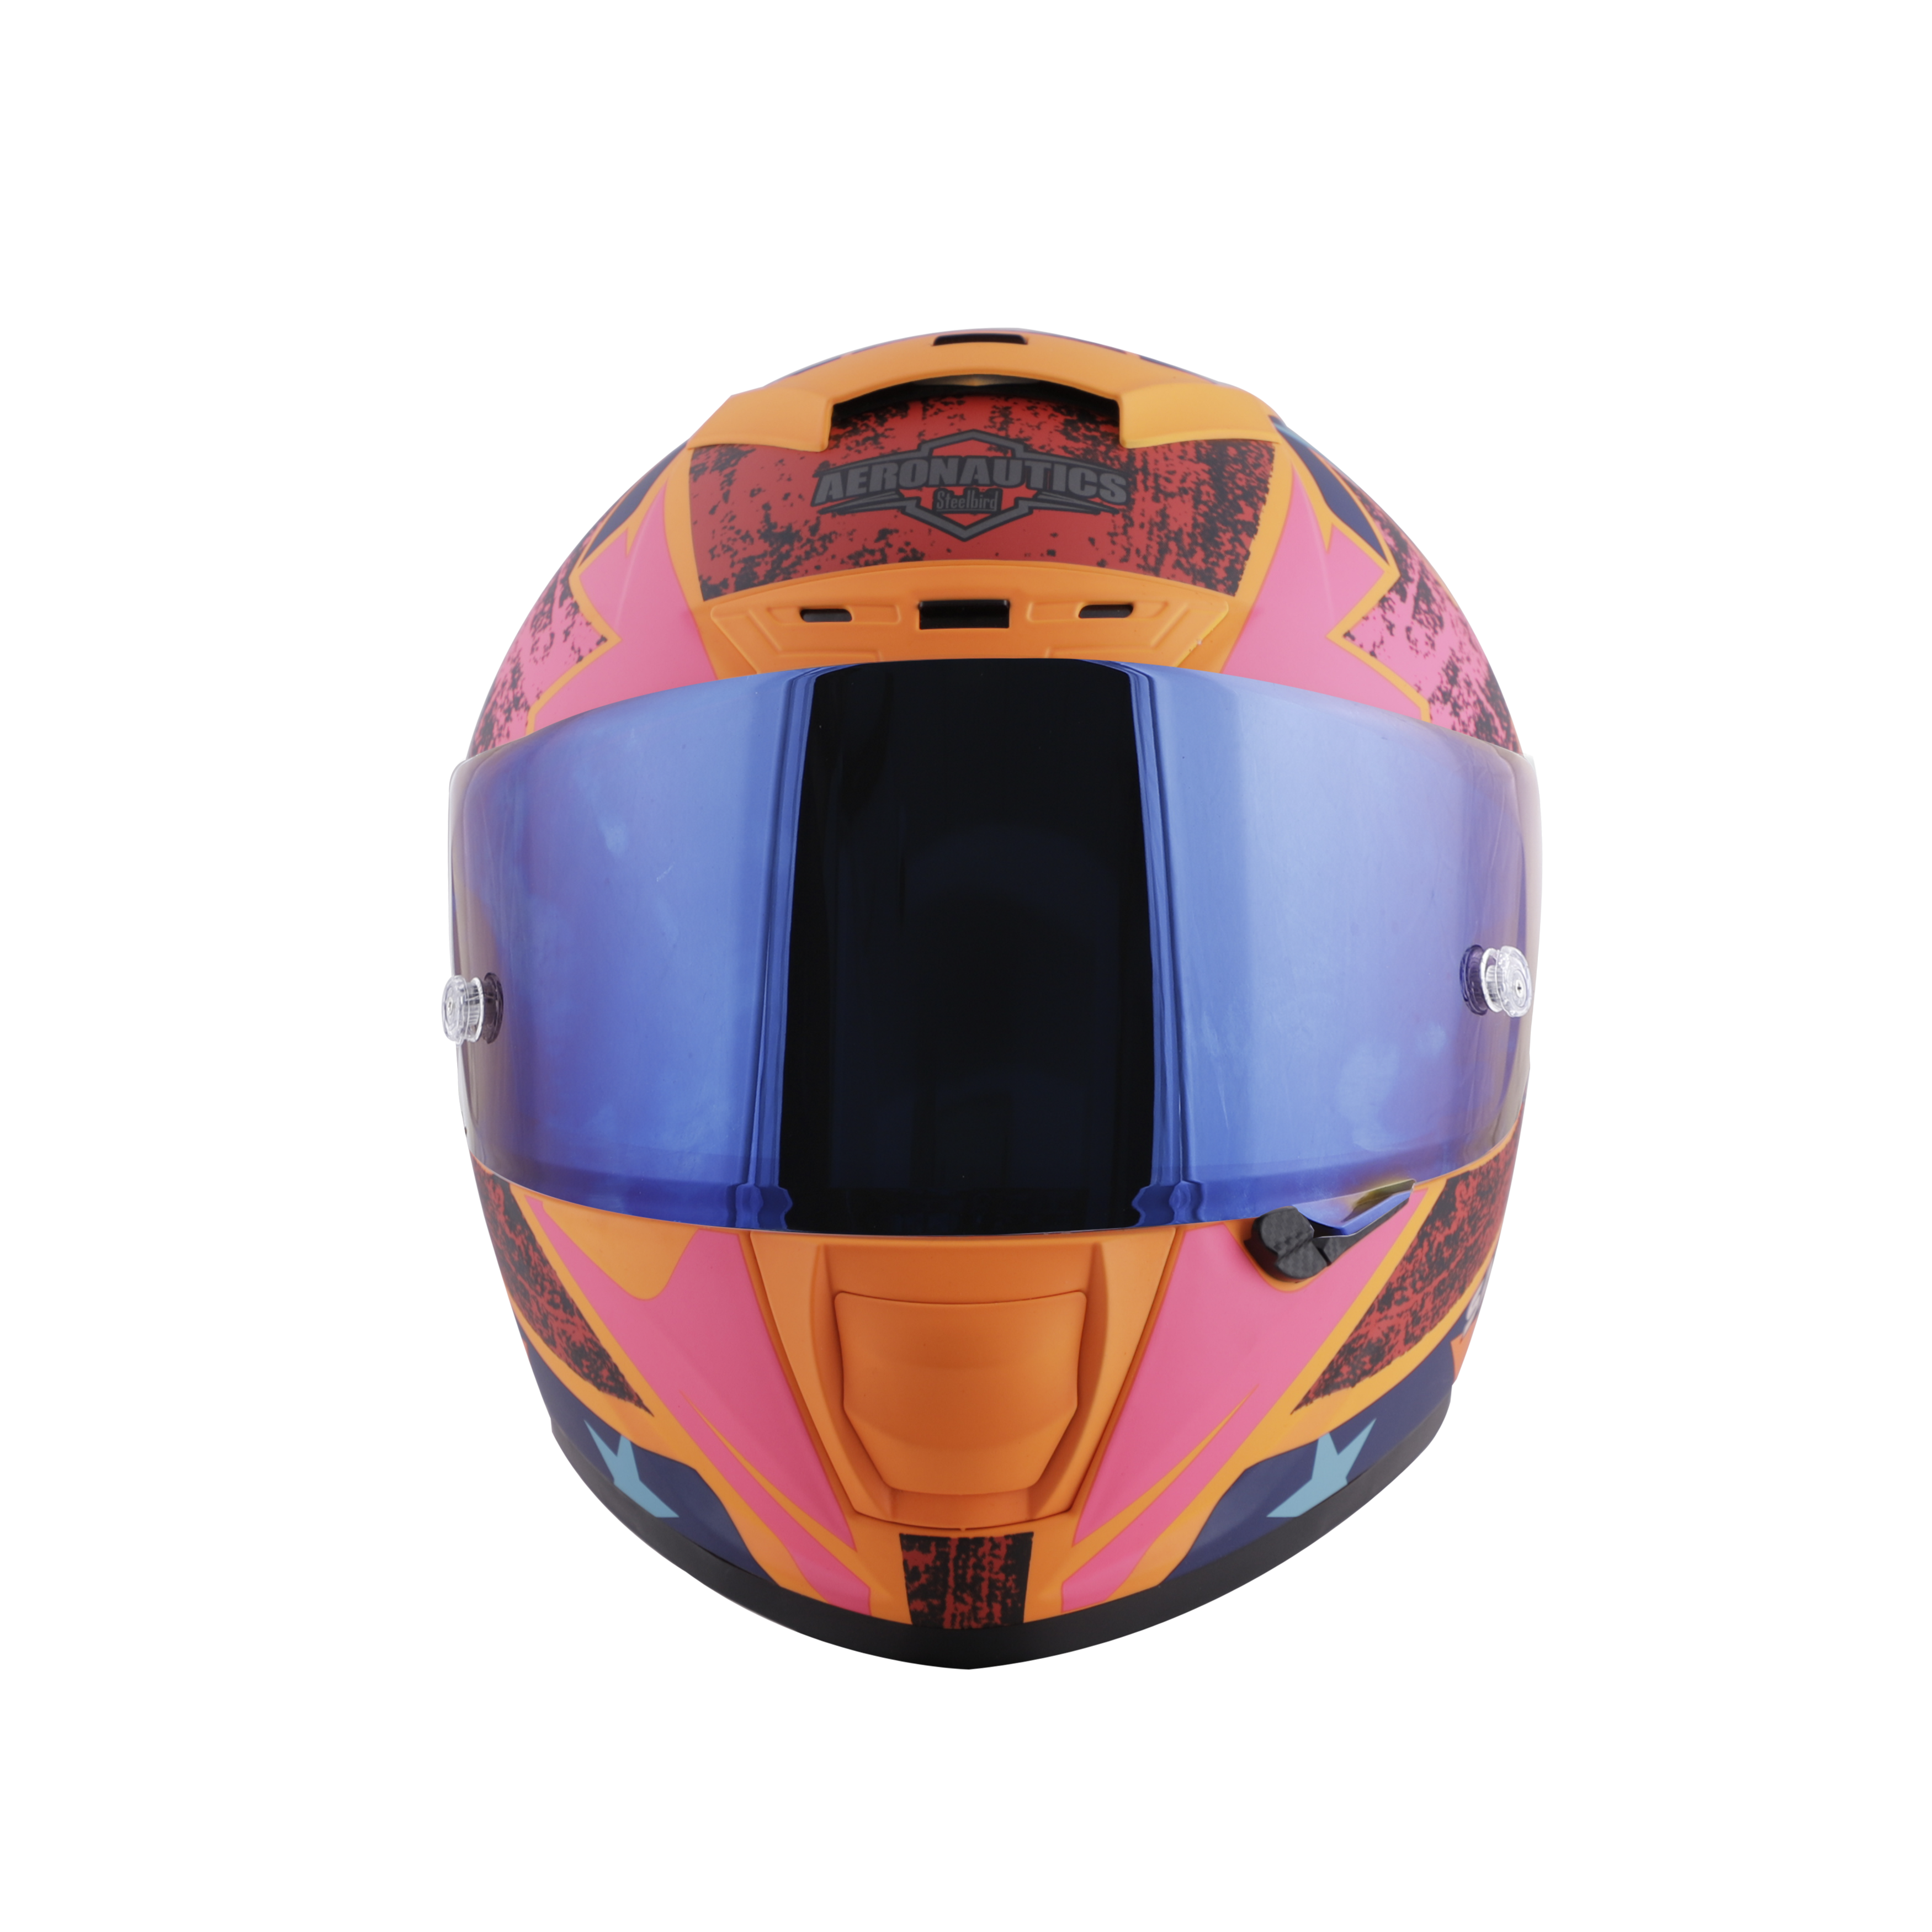 SA-2 STAR GLOSSY FLUO ORANGE WITH RED FITTED WITH CLEAR VISOR EXTRA CHROME BLUE VISOR FREE (WITH ANTI-FOG SHIELD HOLDER)